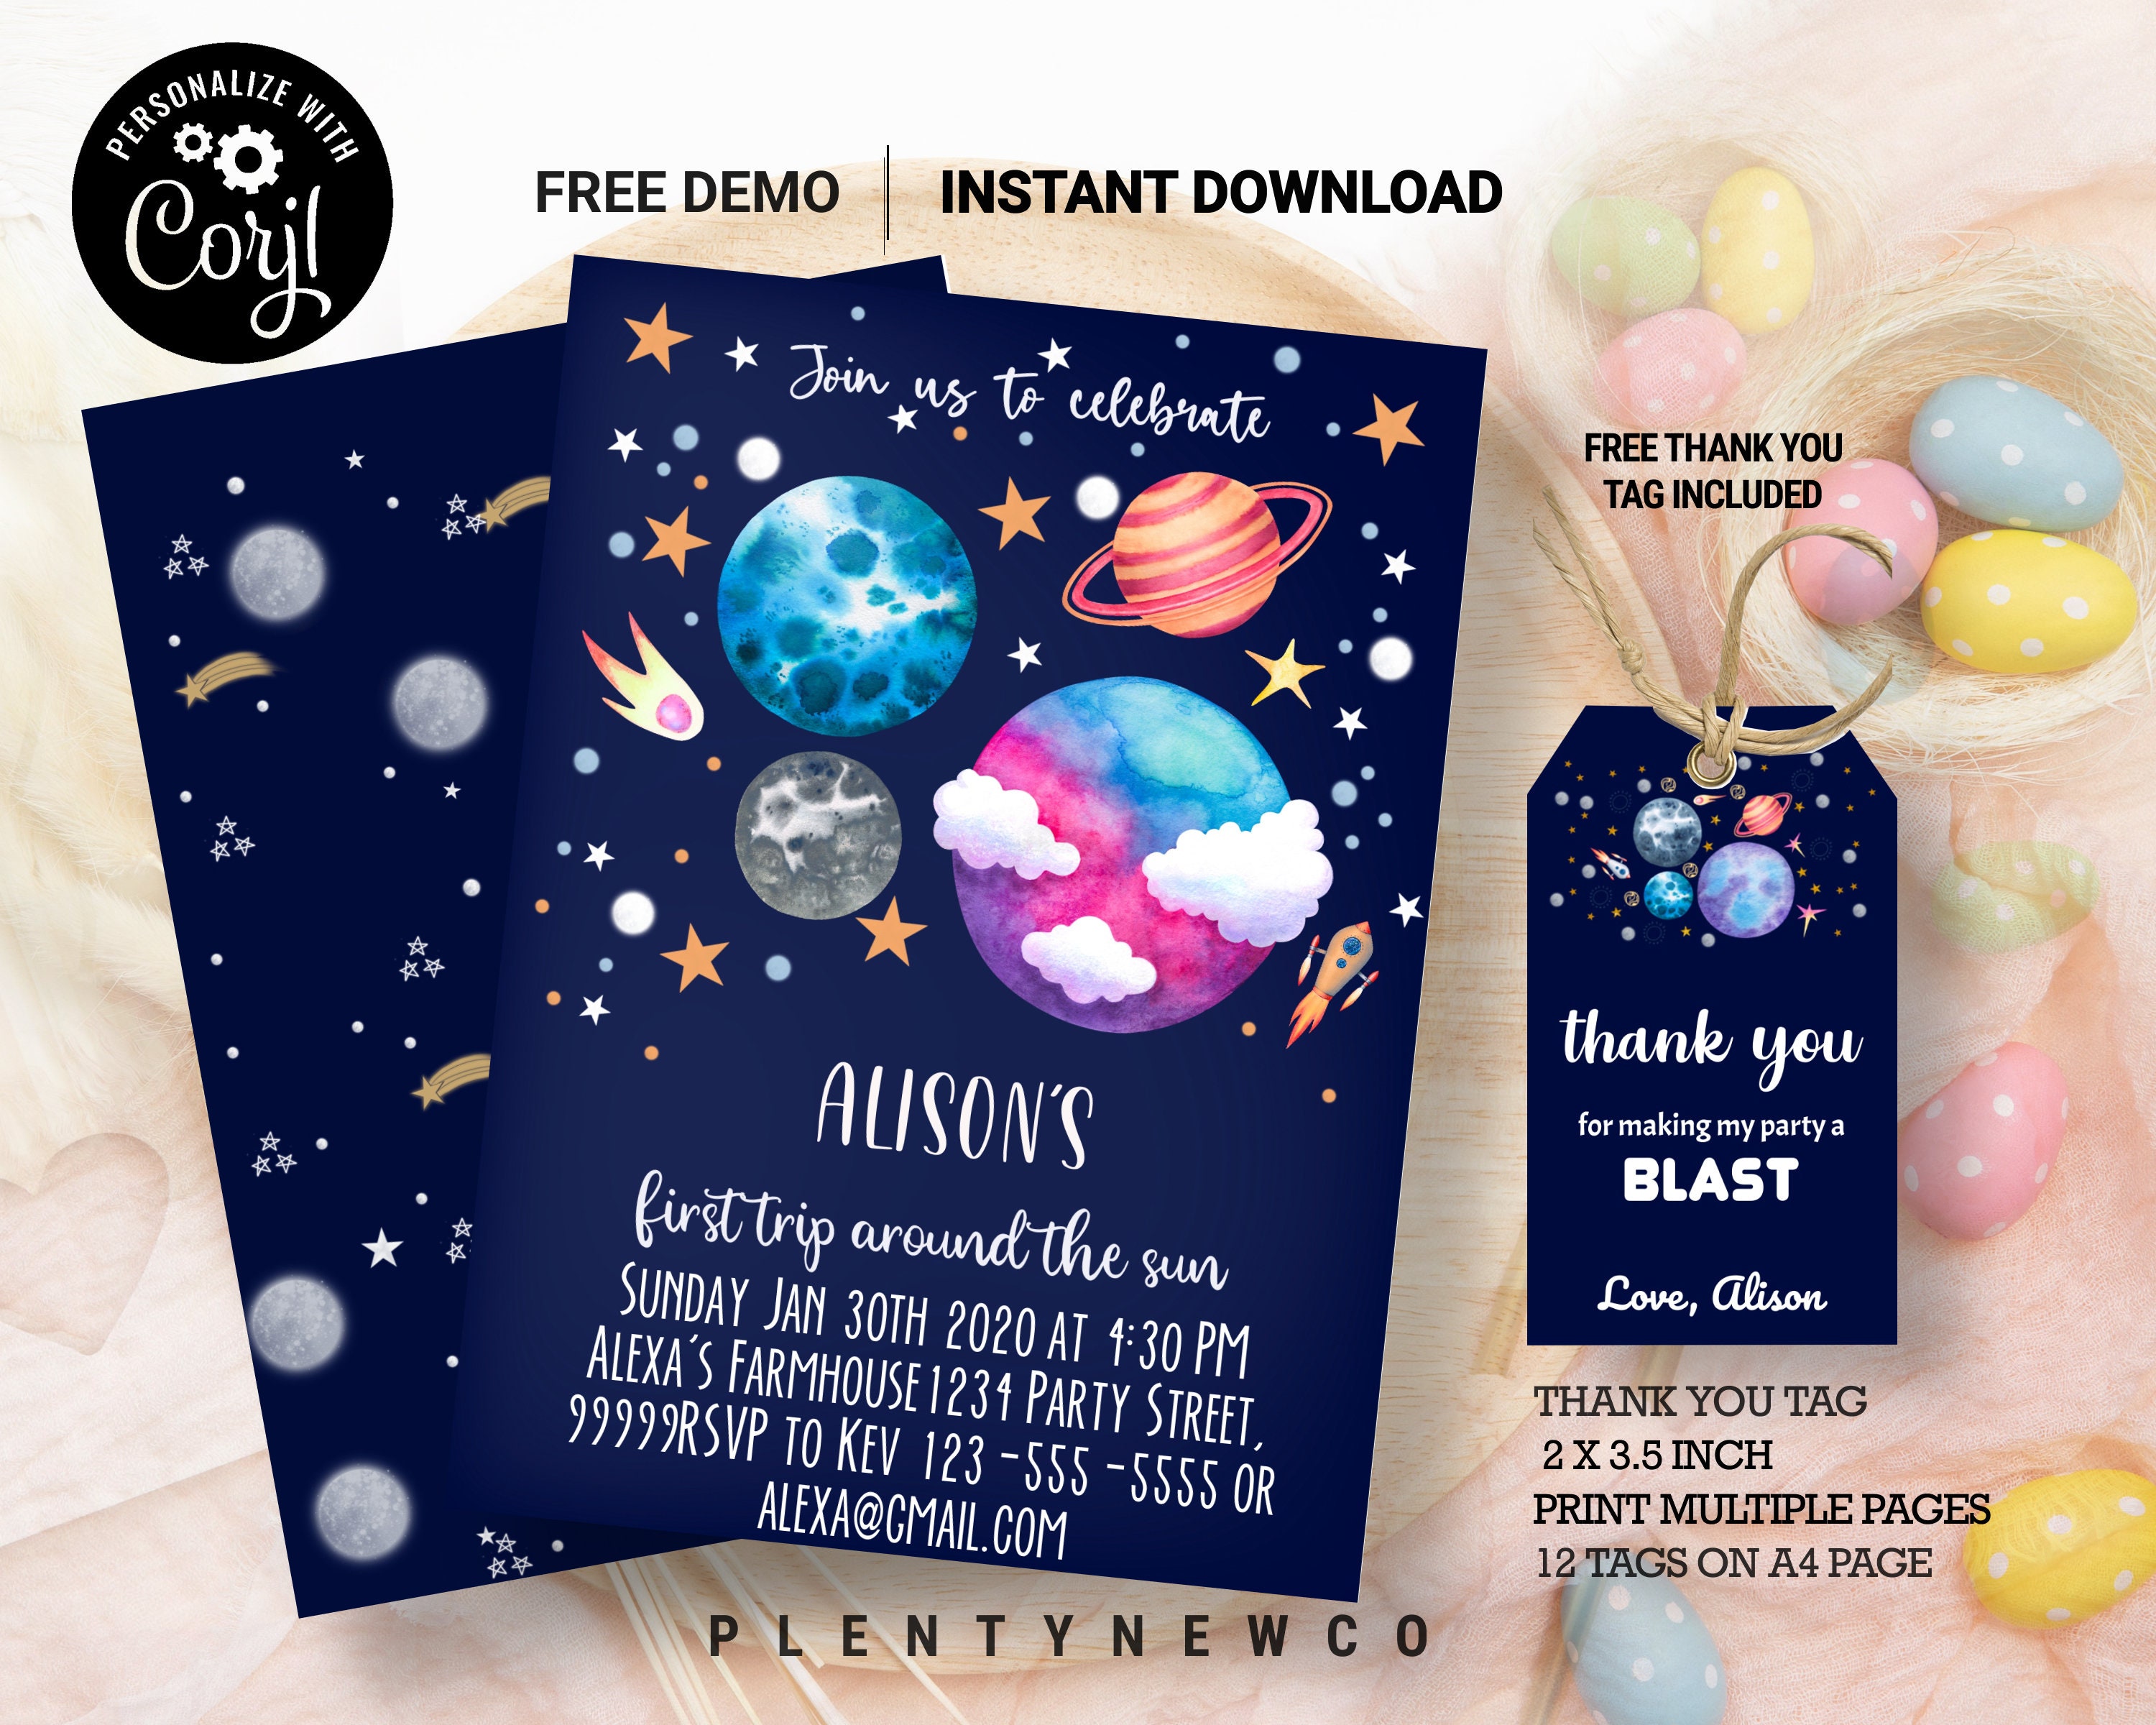 Incredibly Black and White Birthday Party Themed Ideas  Download Hundreds  FREE PRINTABLE Birthday Invitation Templates